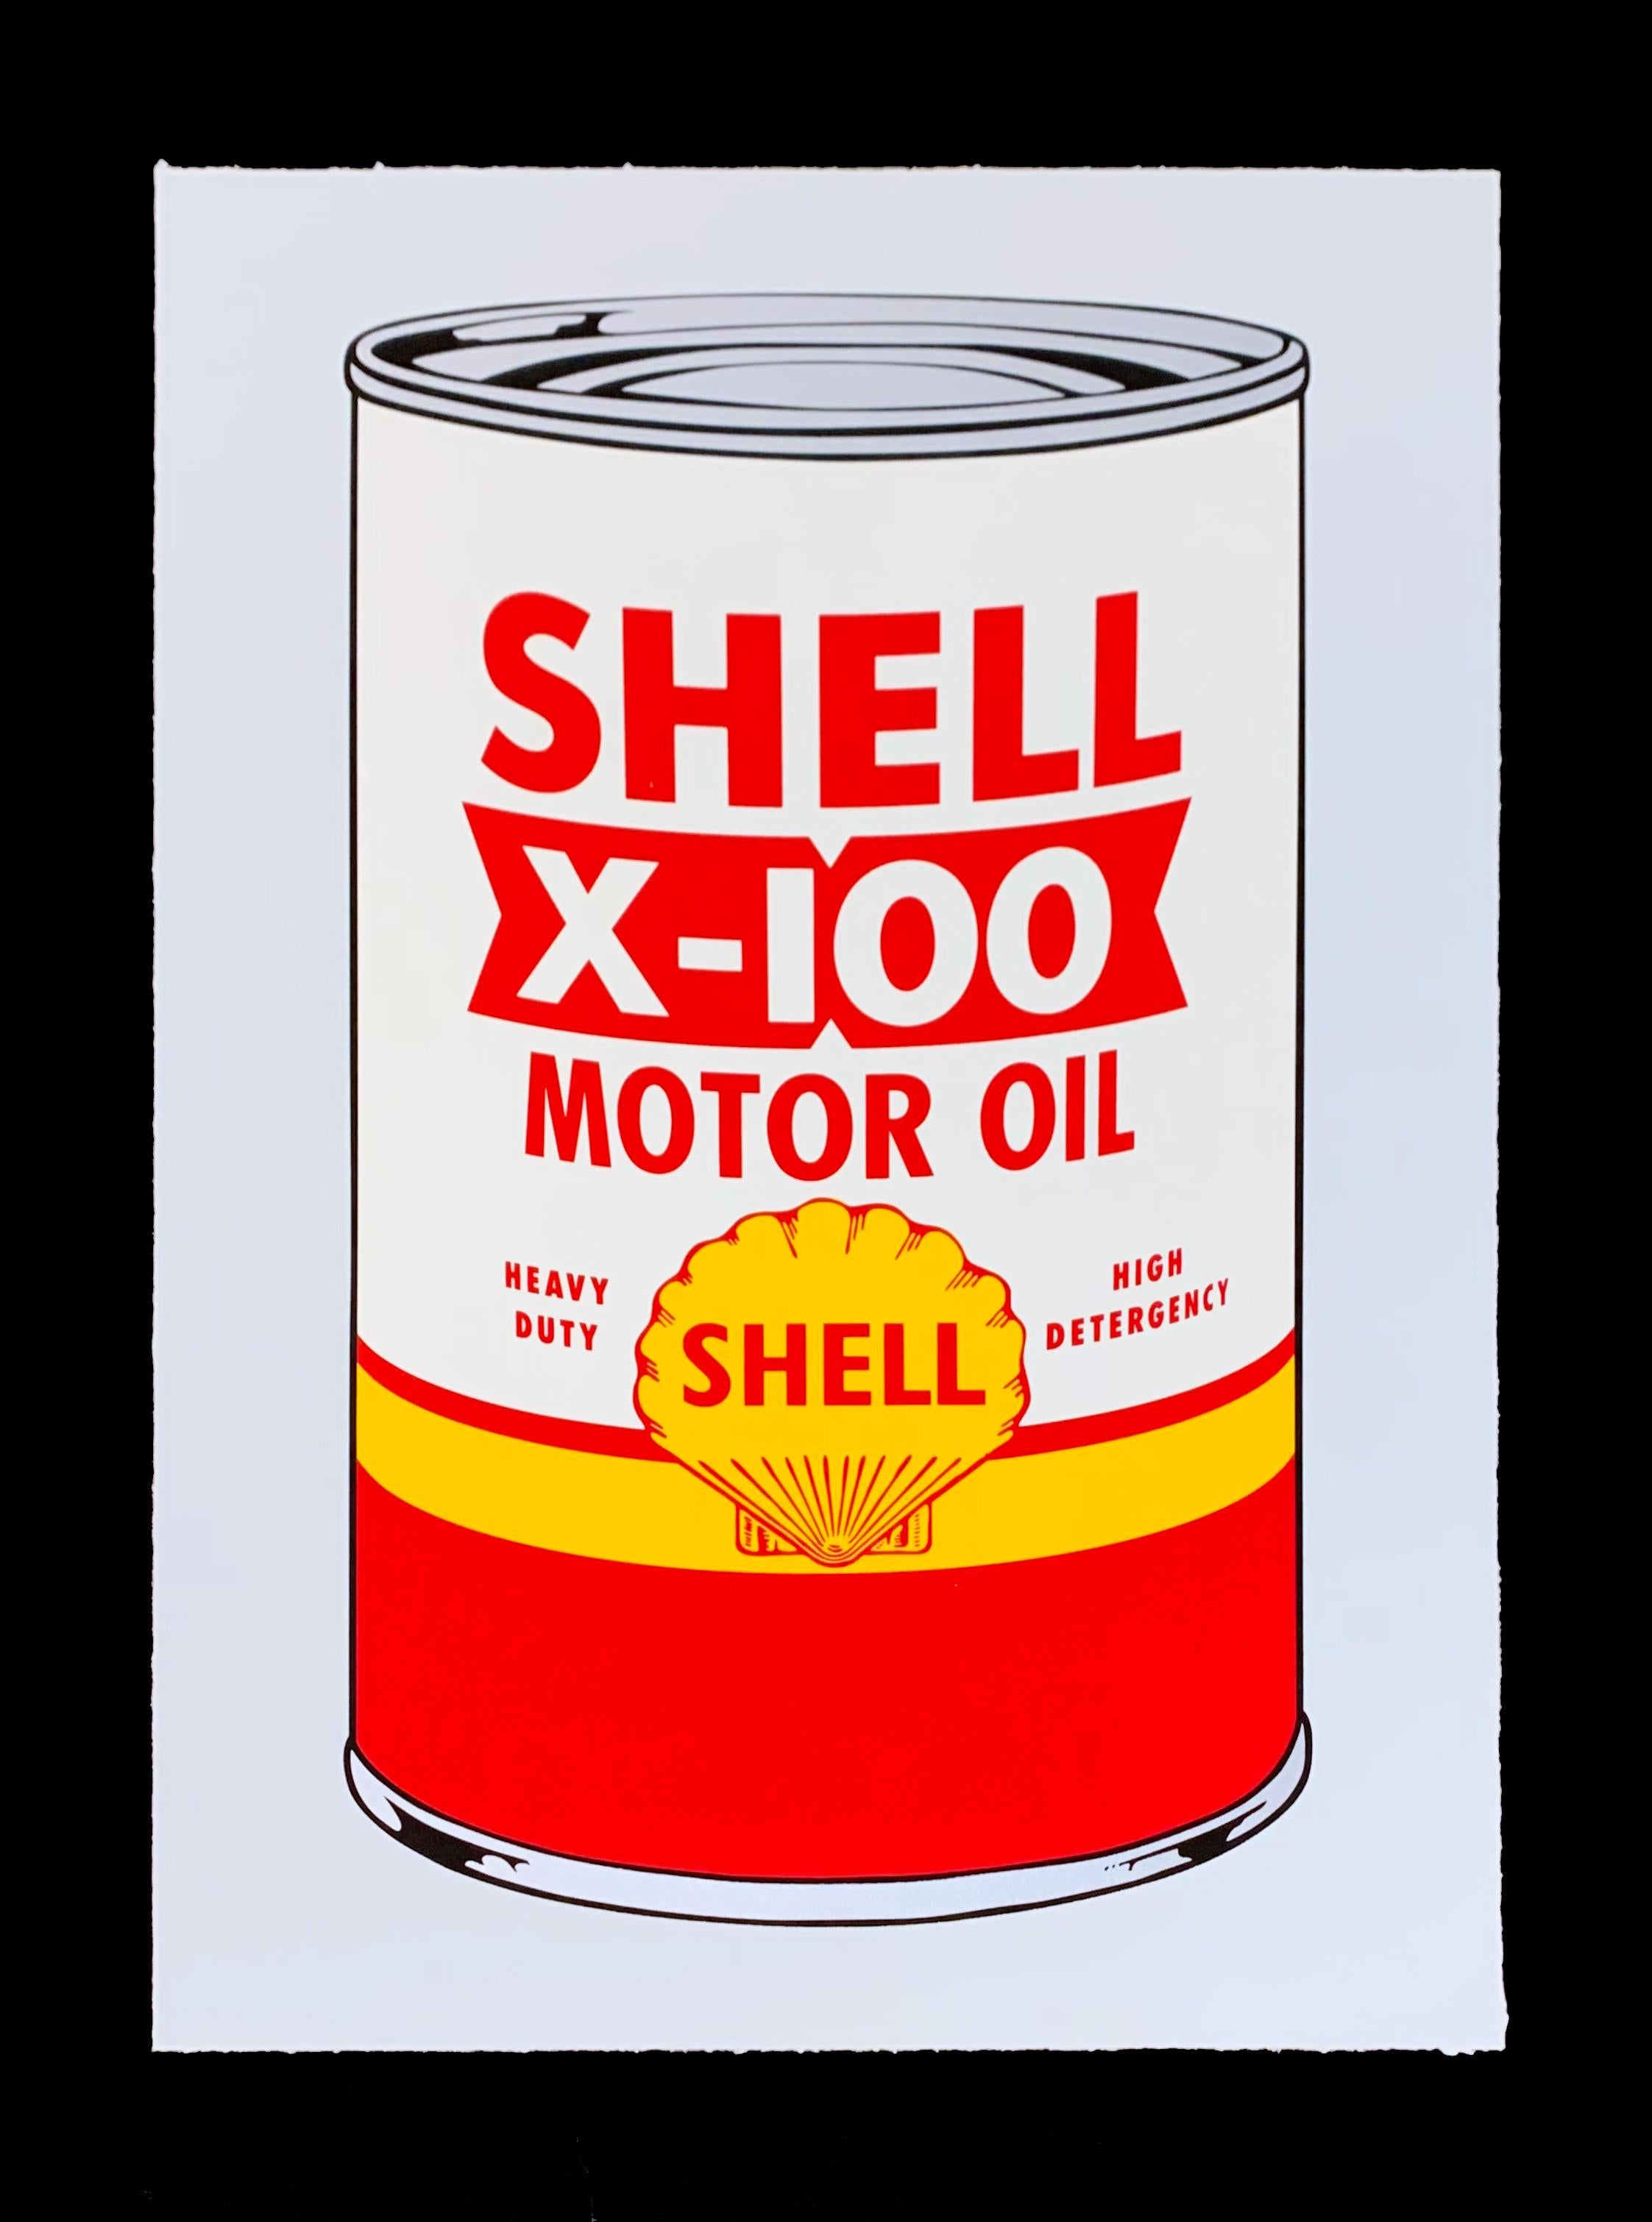 Masterpieces in Oils: Shell - Print by Heiner Meyer